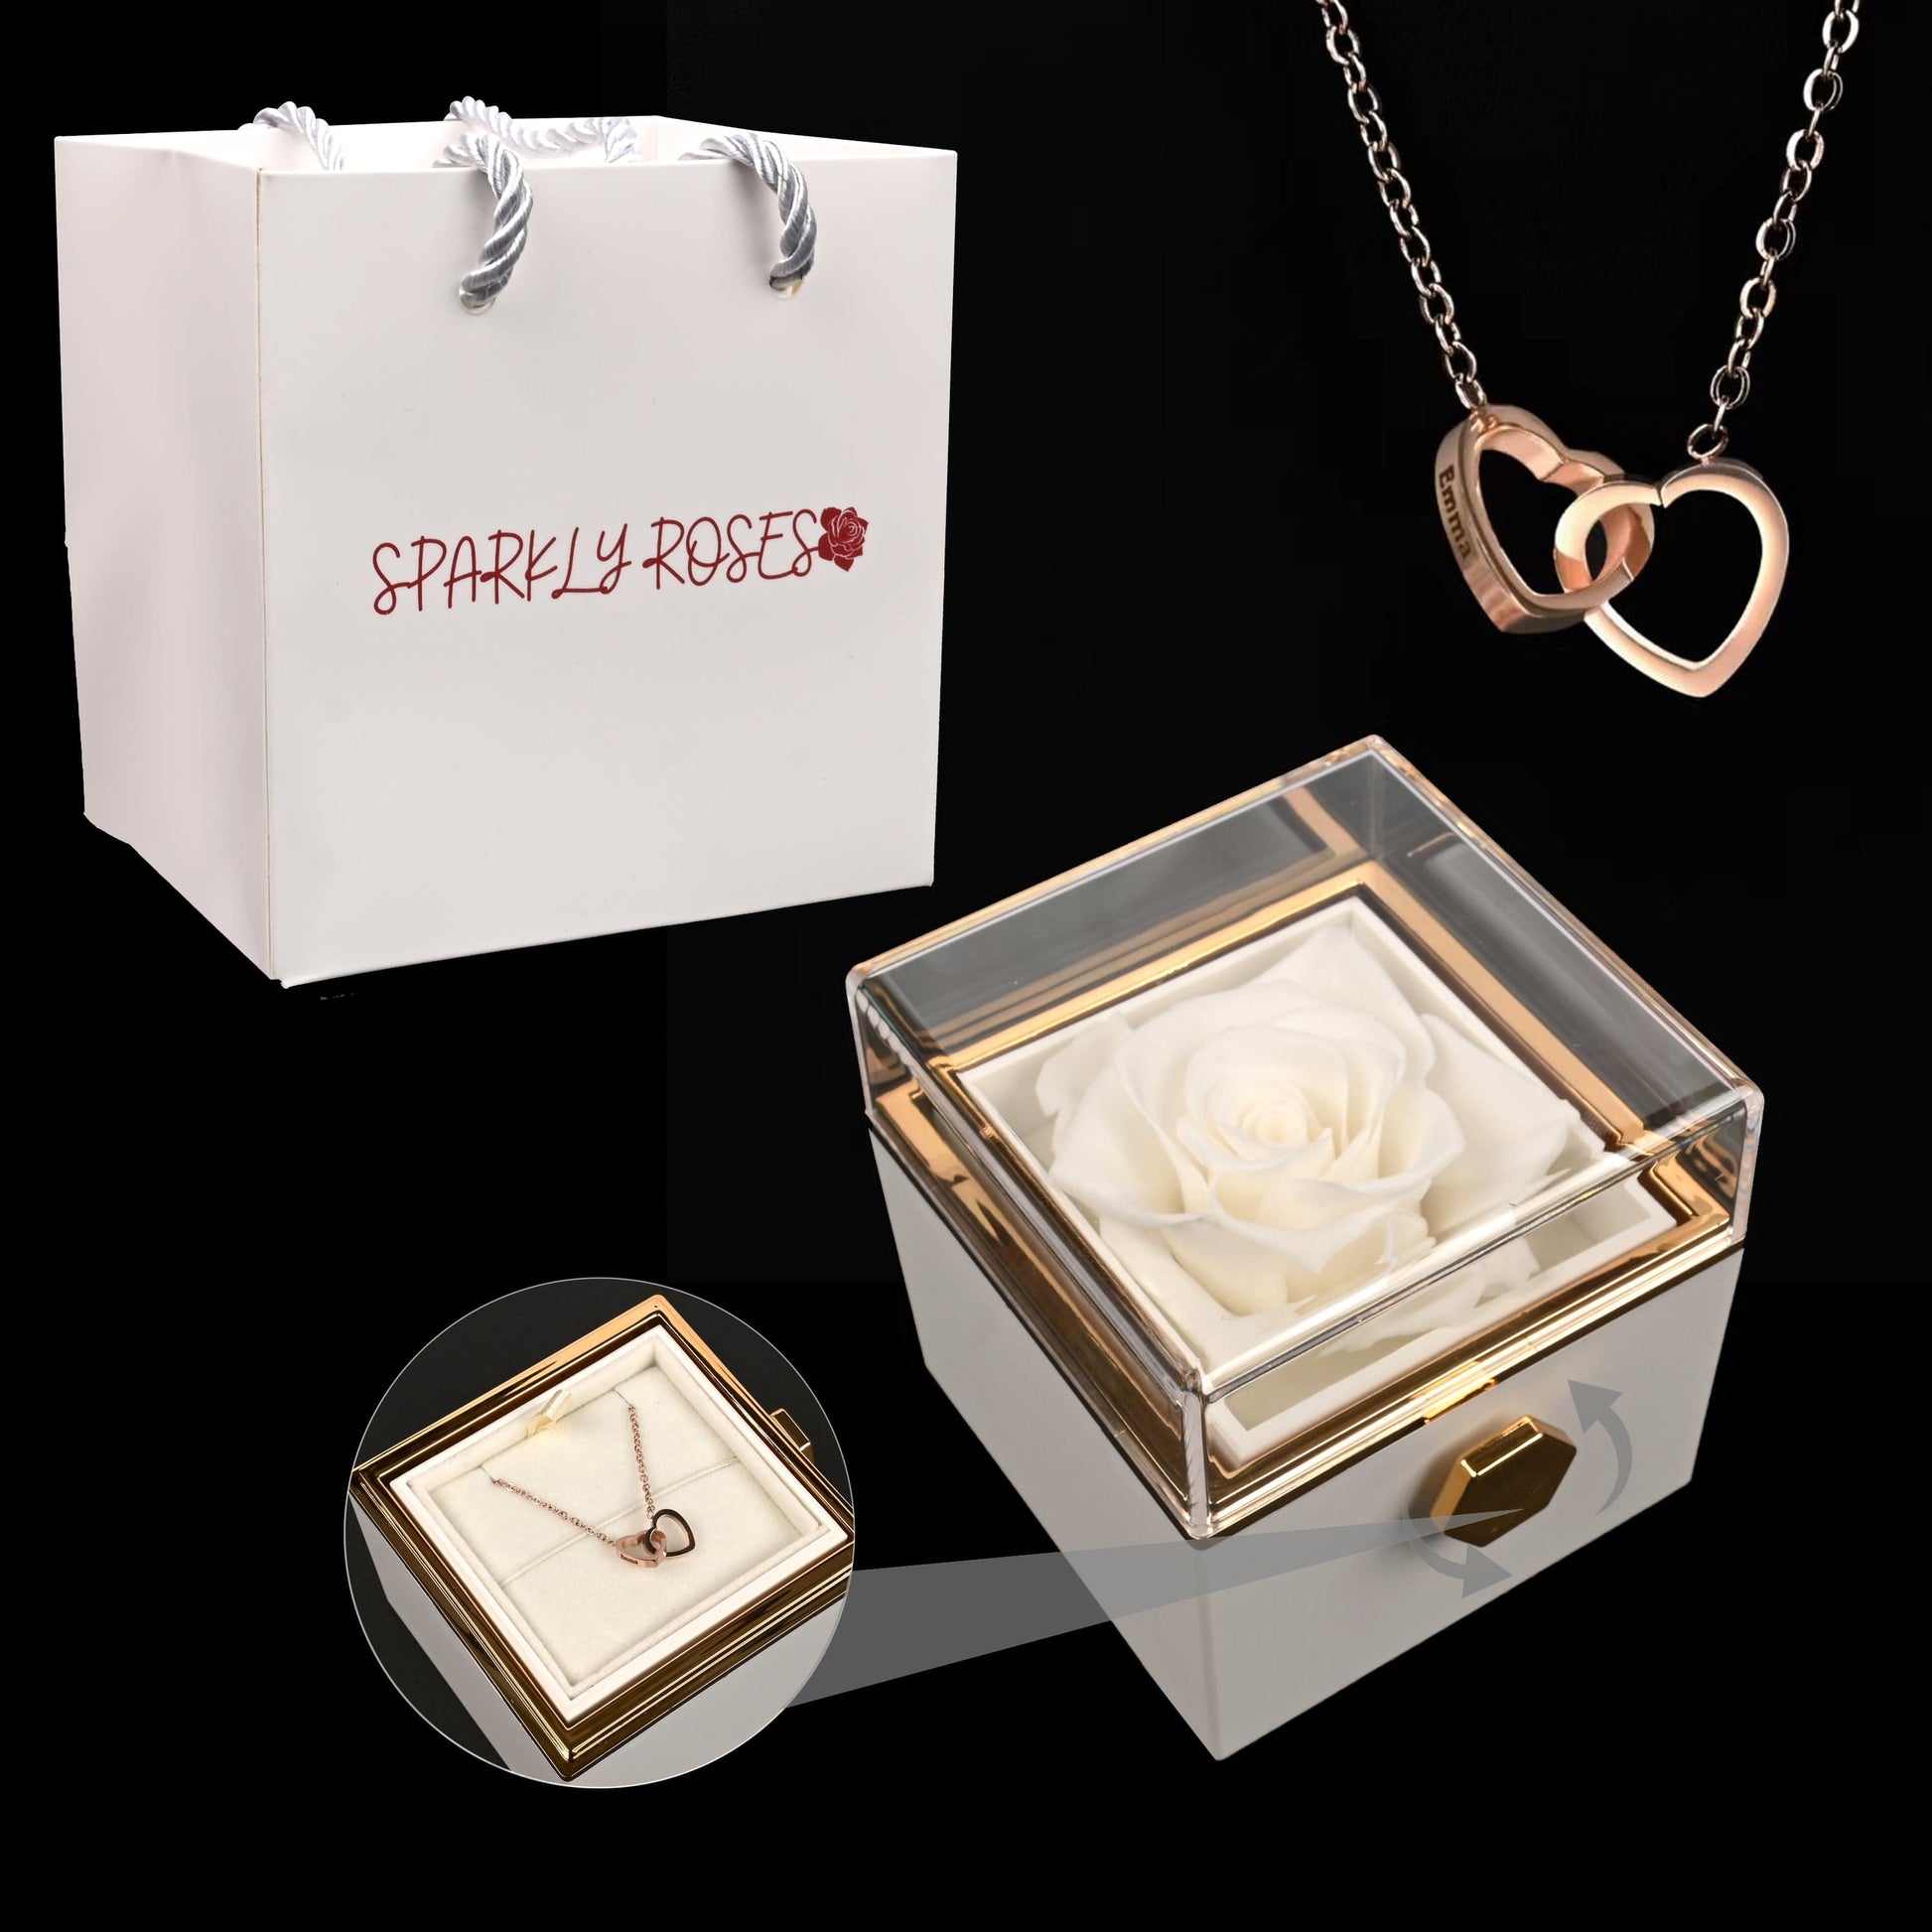 Sparkly Roses Eternal Rose Box - W/ Engraved Necklace & Real Rose White / Rose Gold